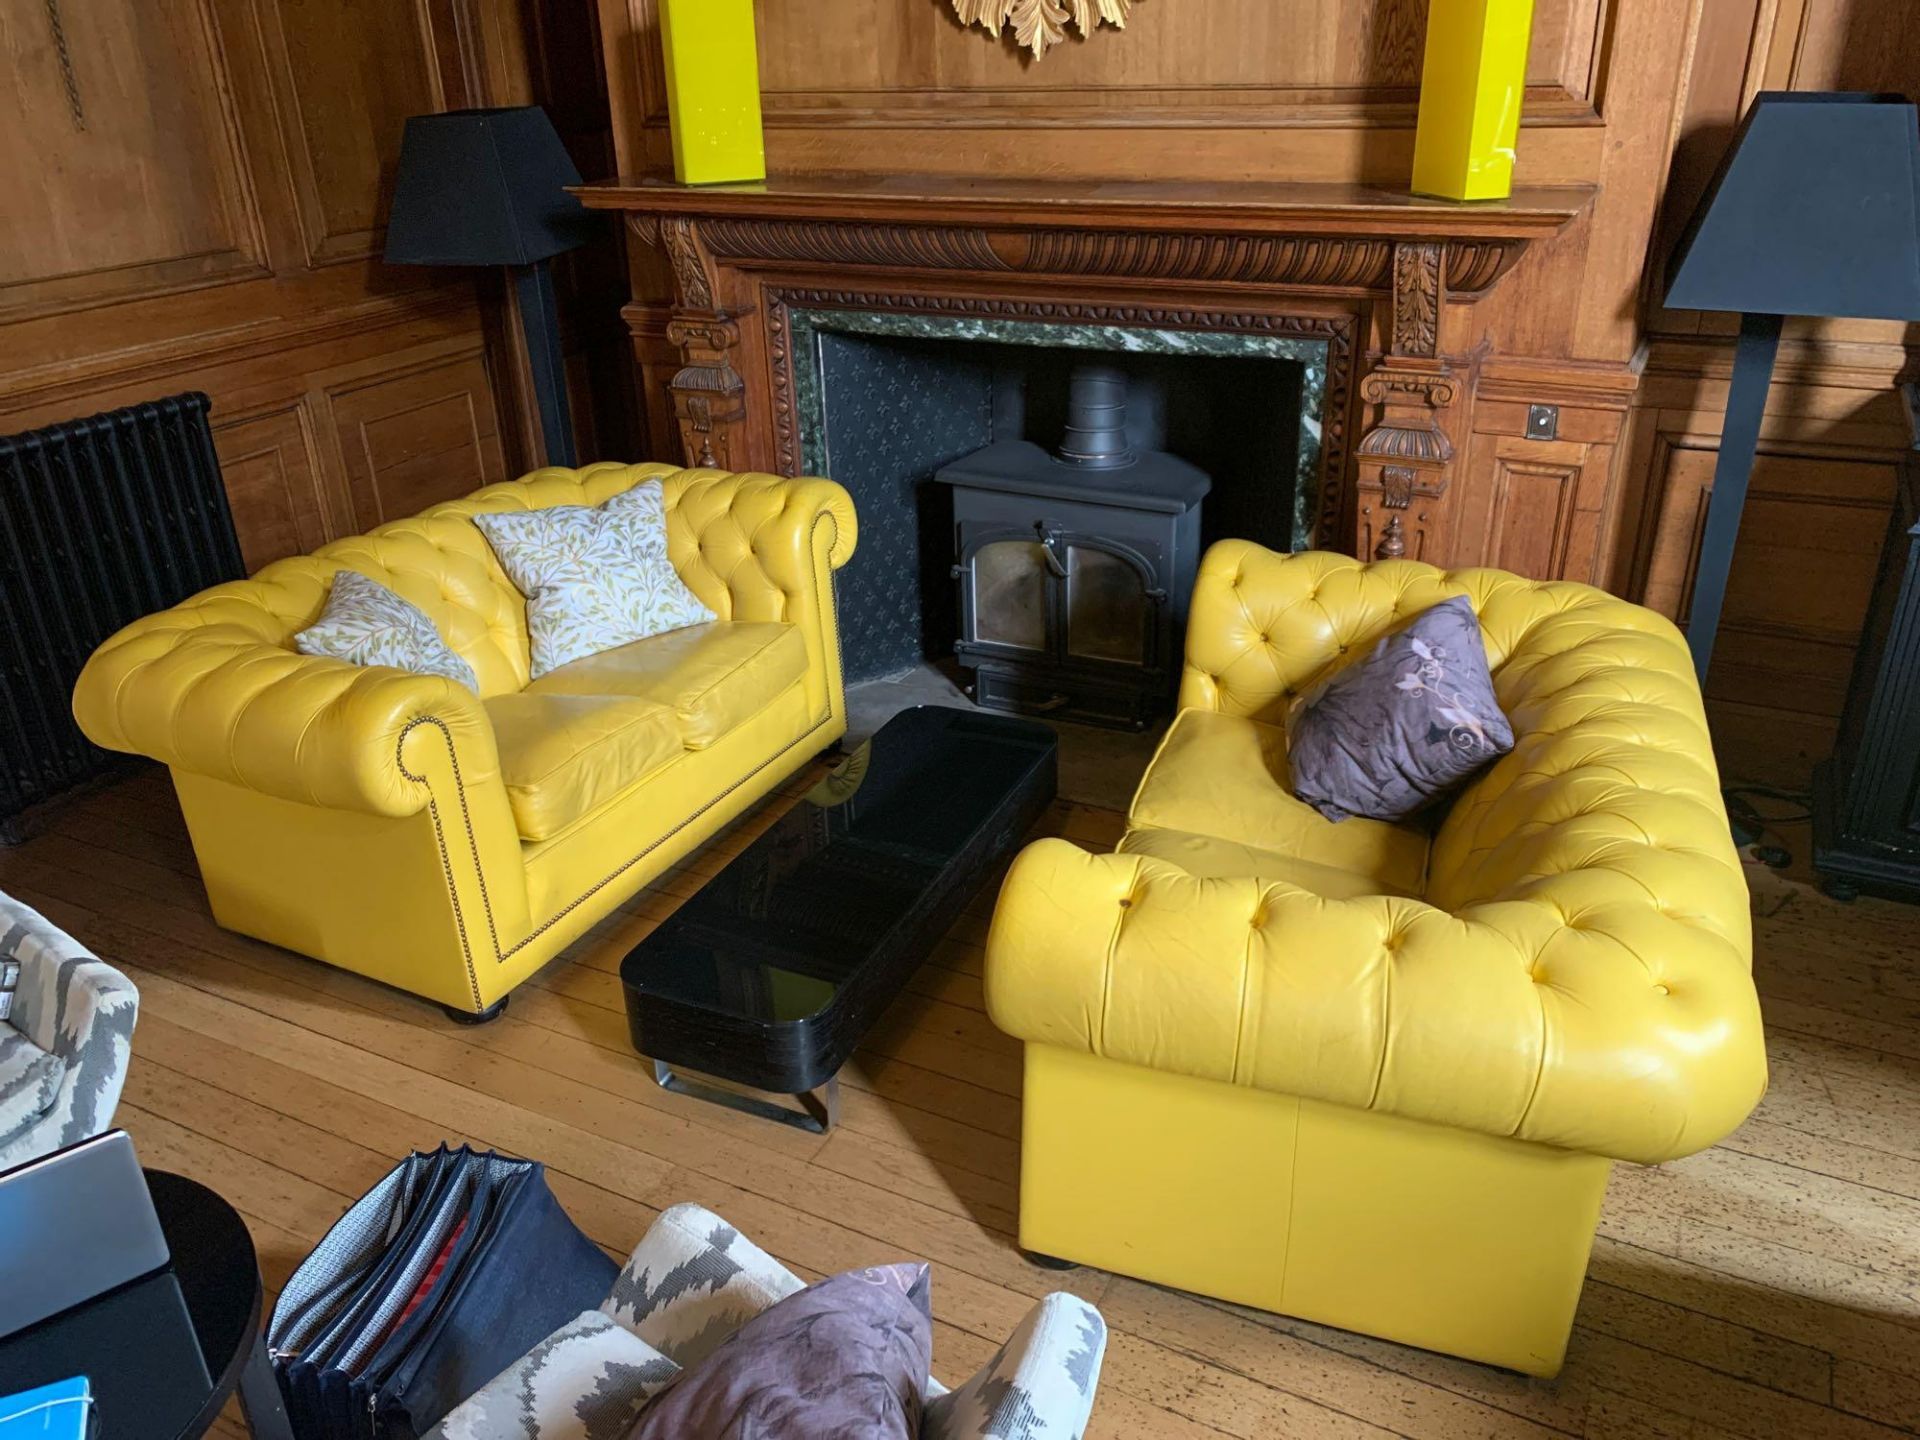 2 x Art Forma Yellow Chesterfield Sofas 160 x 90 x 70 cm - Image 2 of 4